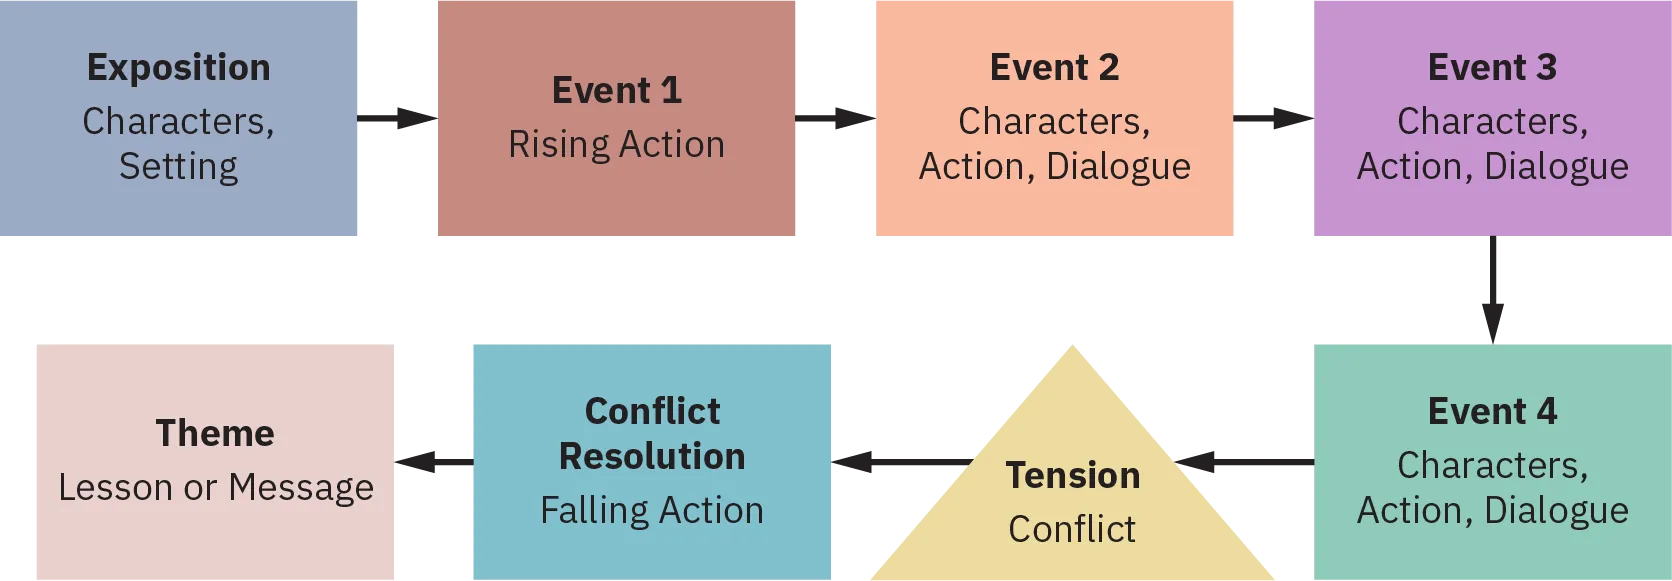 A horizontal flow chart with seven multi-colored rectangles and one triangle connected by arrows, proceeding from Exposition (characters and setting); Event 1. Rising Action; Event 2. Characters, Action, and Dialogue; Event 3. Repeat Event 2 ; Event 4. Repeat Event 2; Tension/Triangle (conflict); Conflict Resolution (falling action); and Theme (lesson or message).